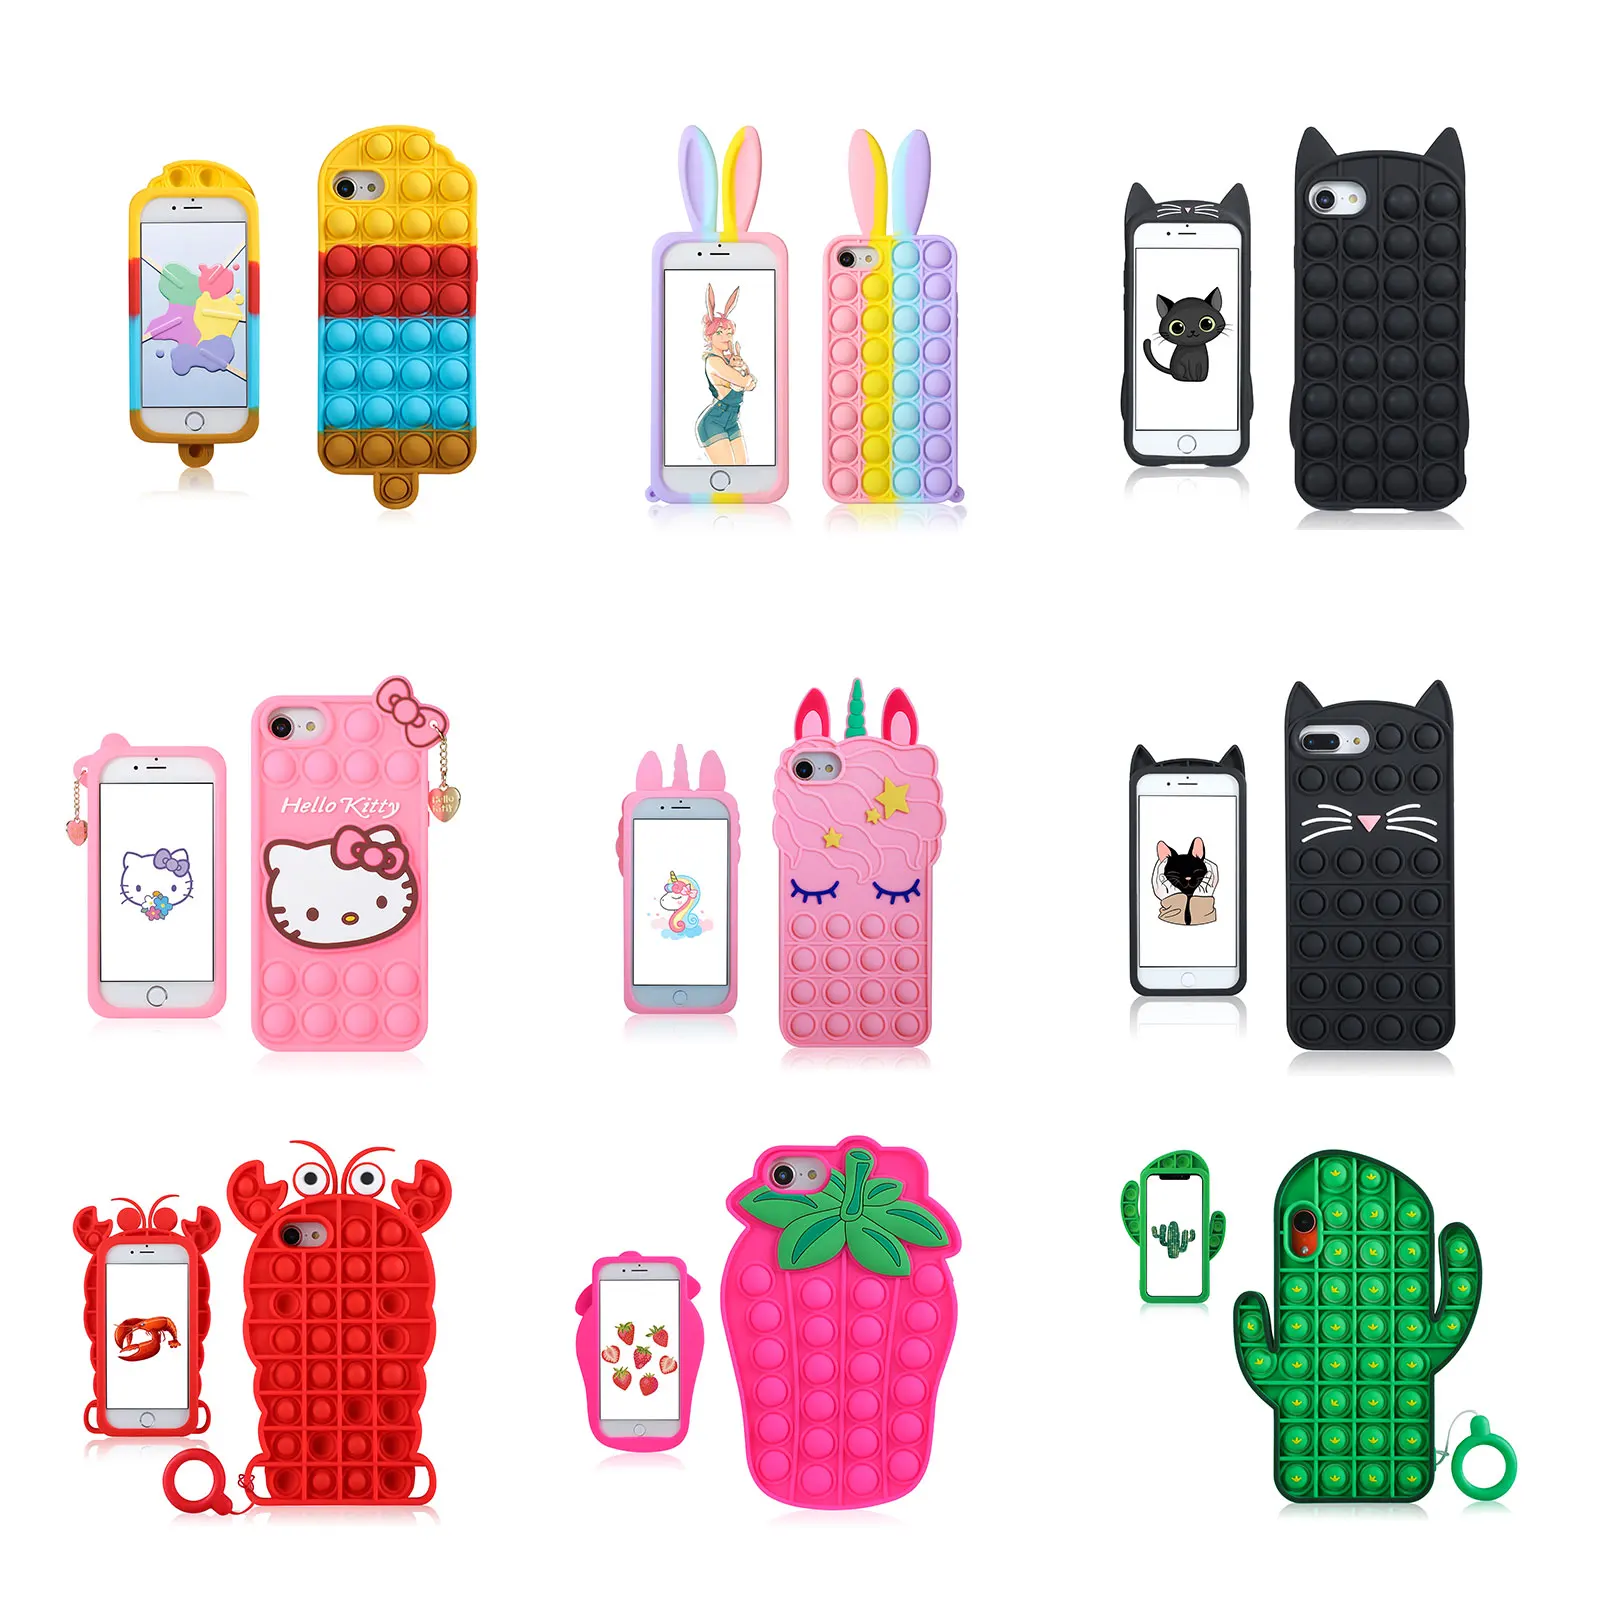 2021 New Anxiety Stress Relief Push Pops Bubble Sensory Toy Game 3D Anti Silicone Soft Cell Phone Case for iPhone 12